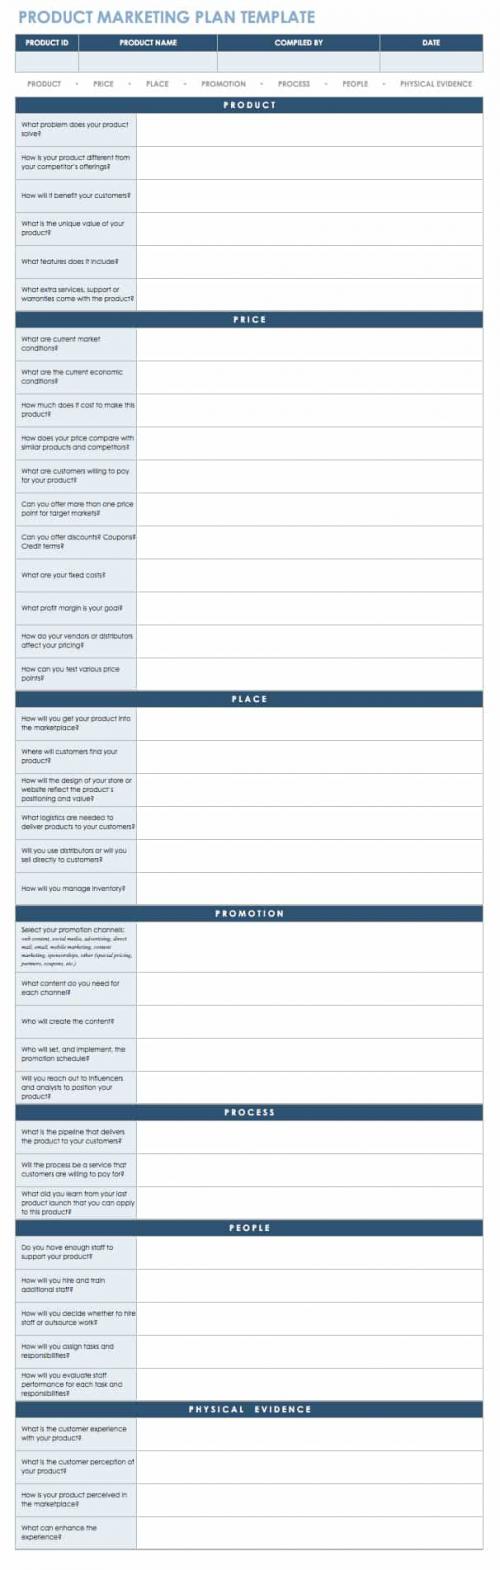 Comprehensive Guide to Product Marketing Smartsheet